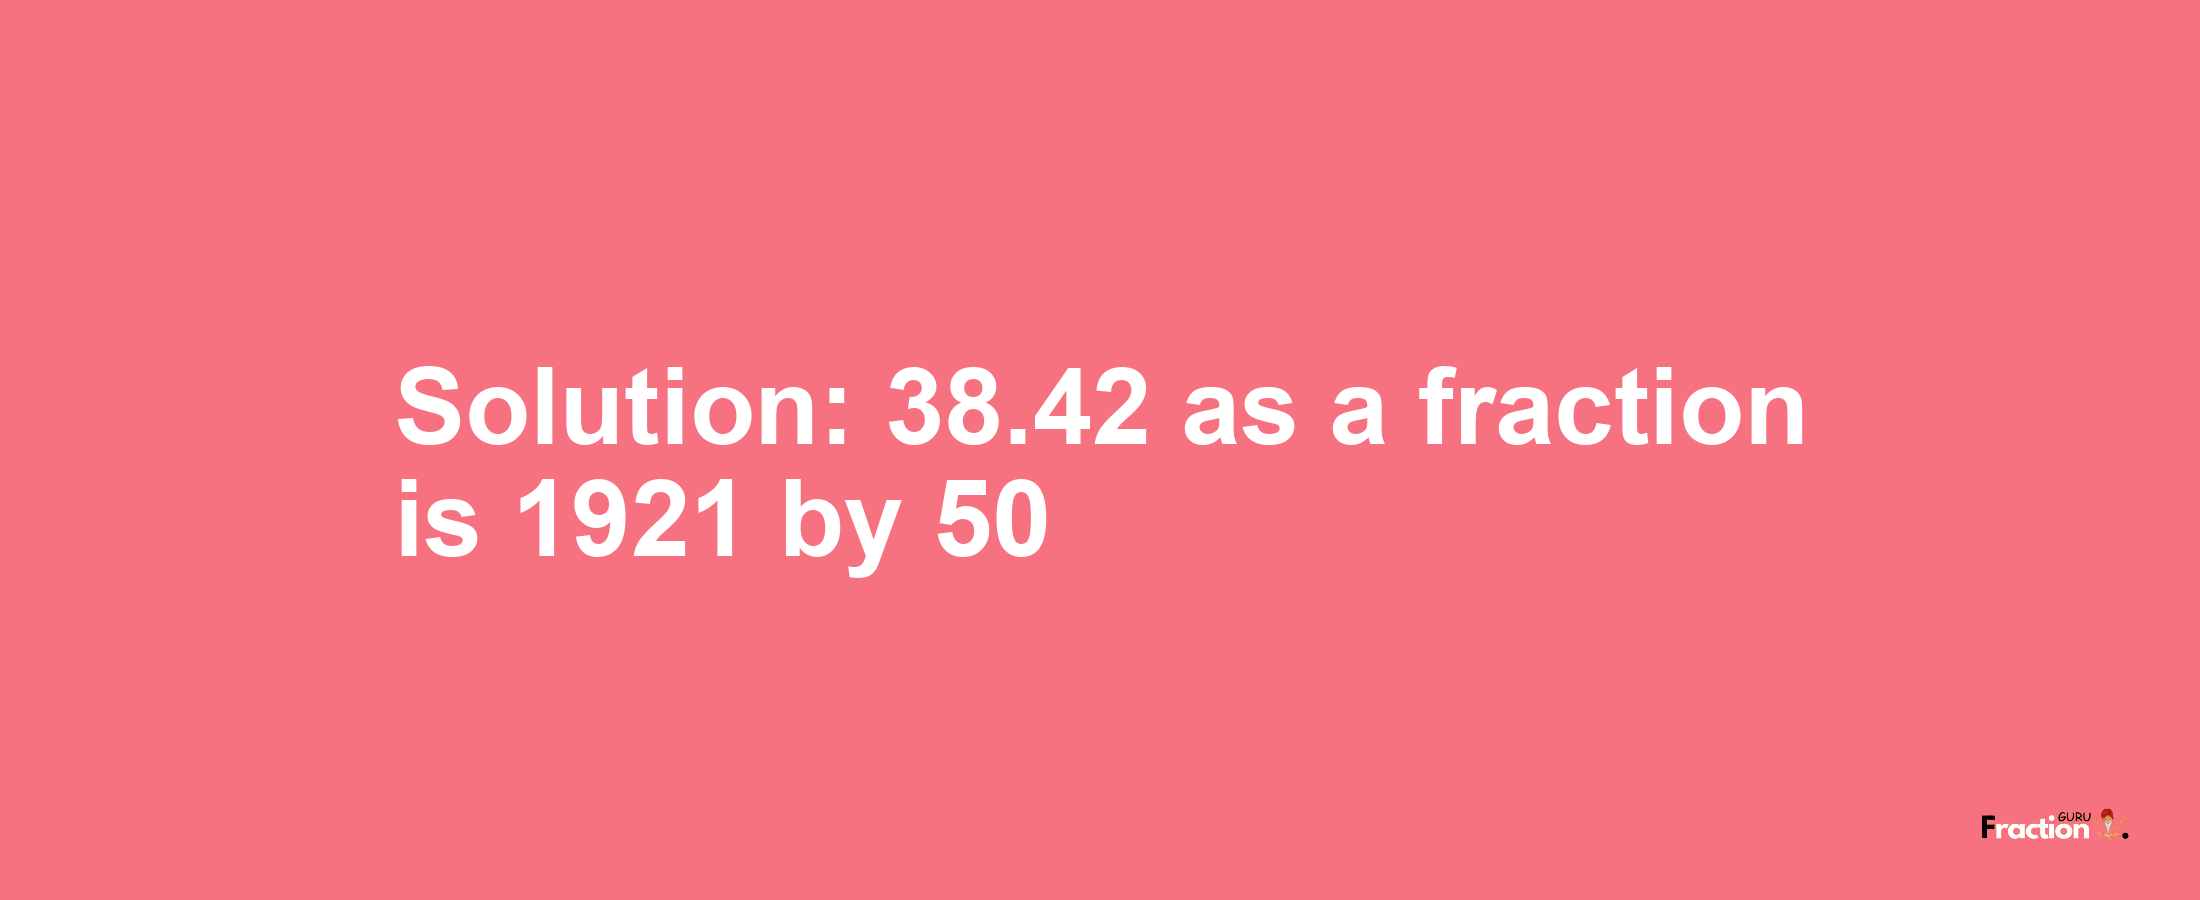 Solution:38.42 as a fraction is 1921/50